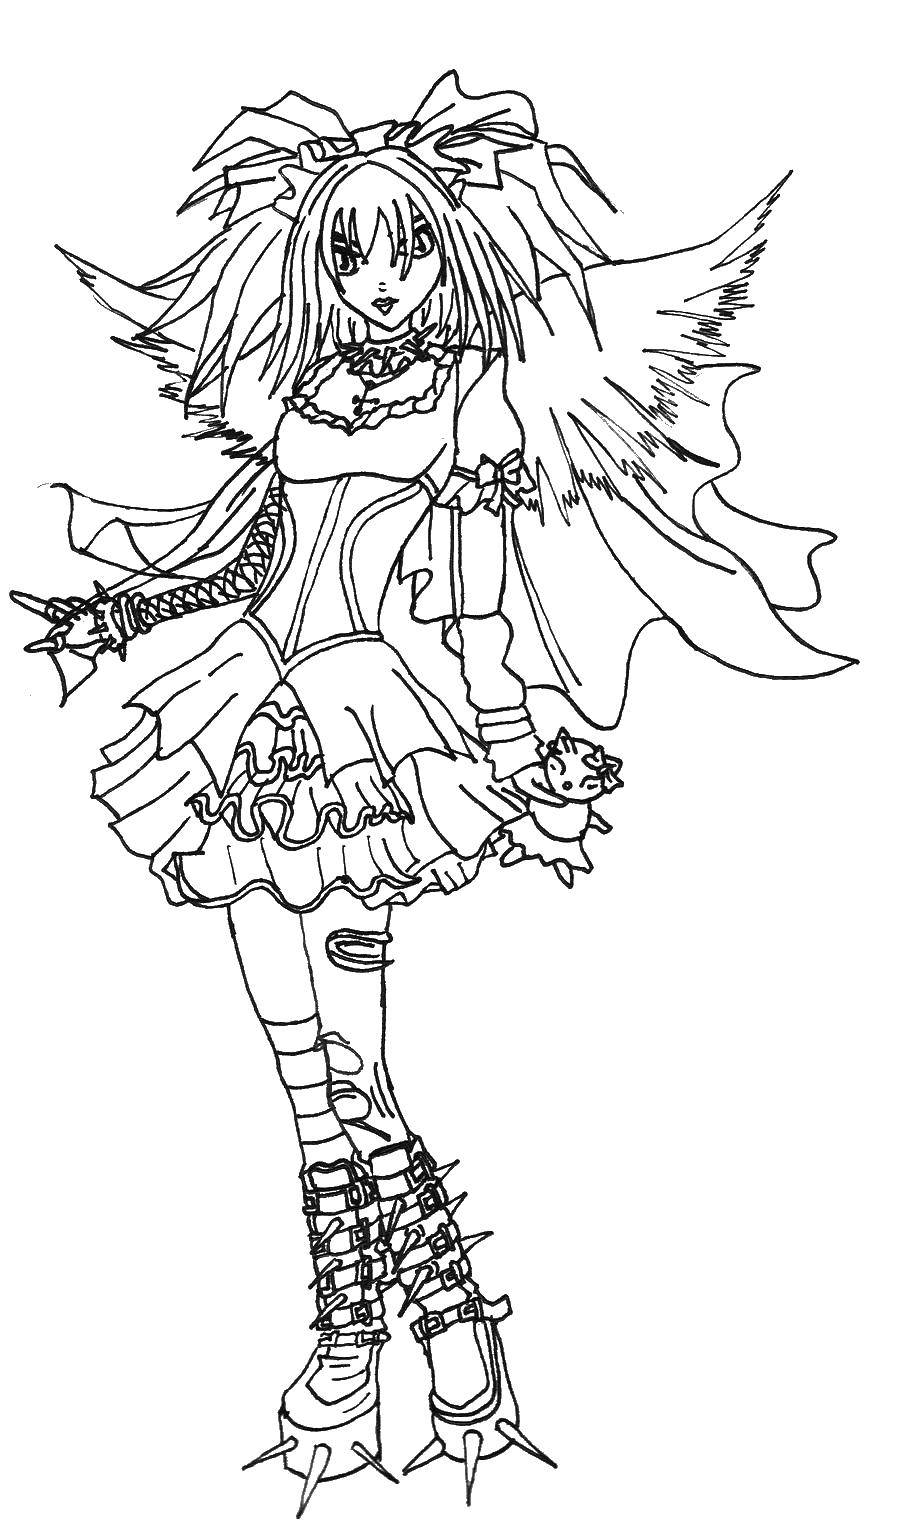 Coloring Cheeky girl with wings. Category girl. Tags:  the girl, spikes, wings.